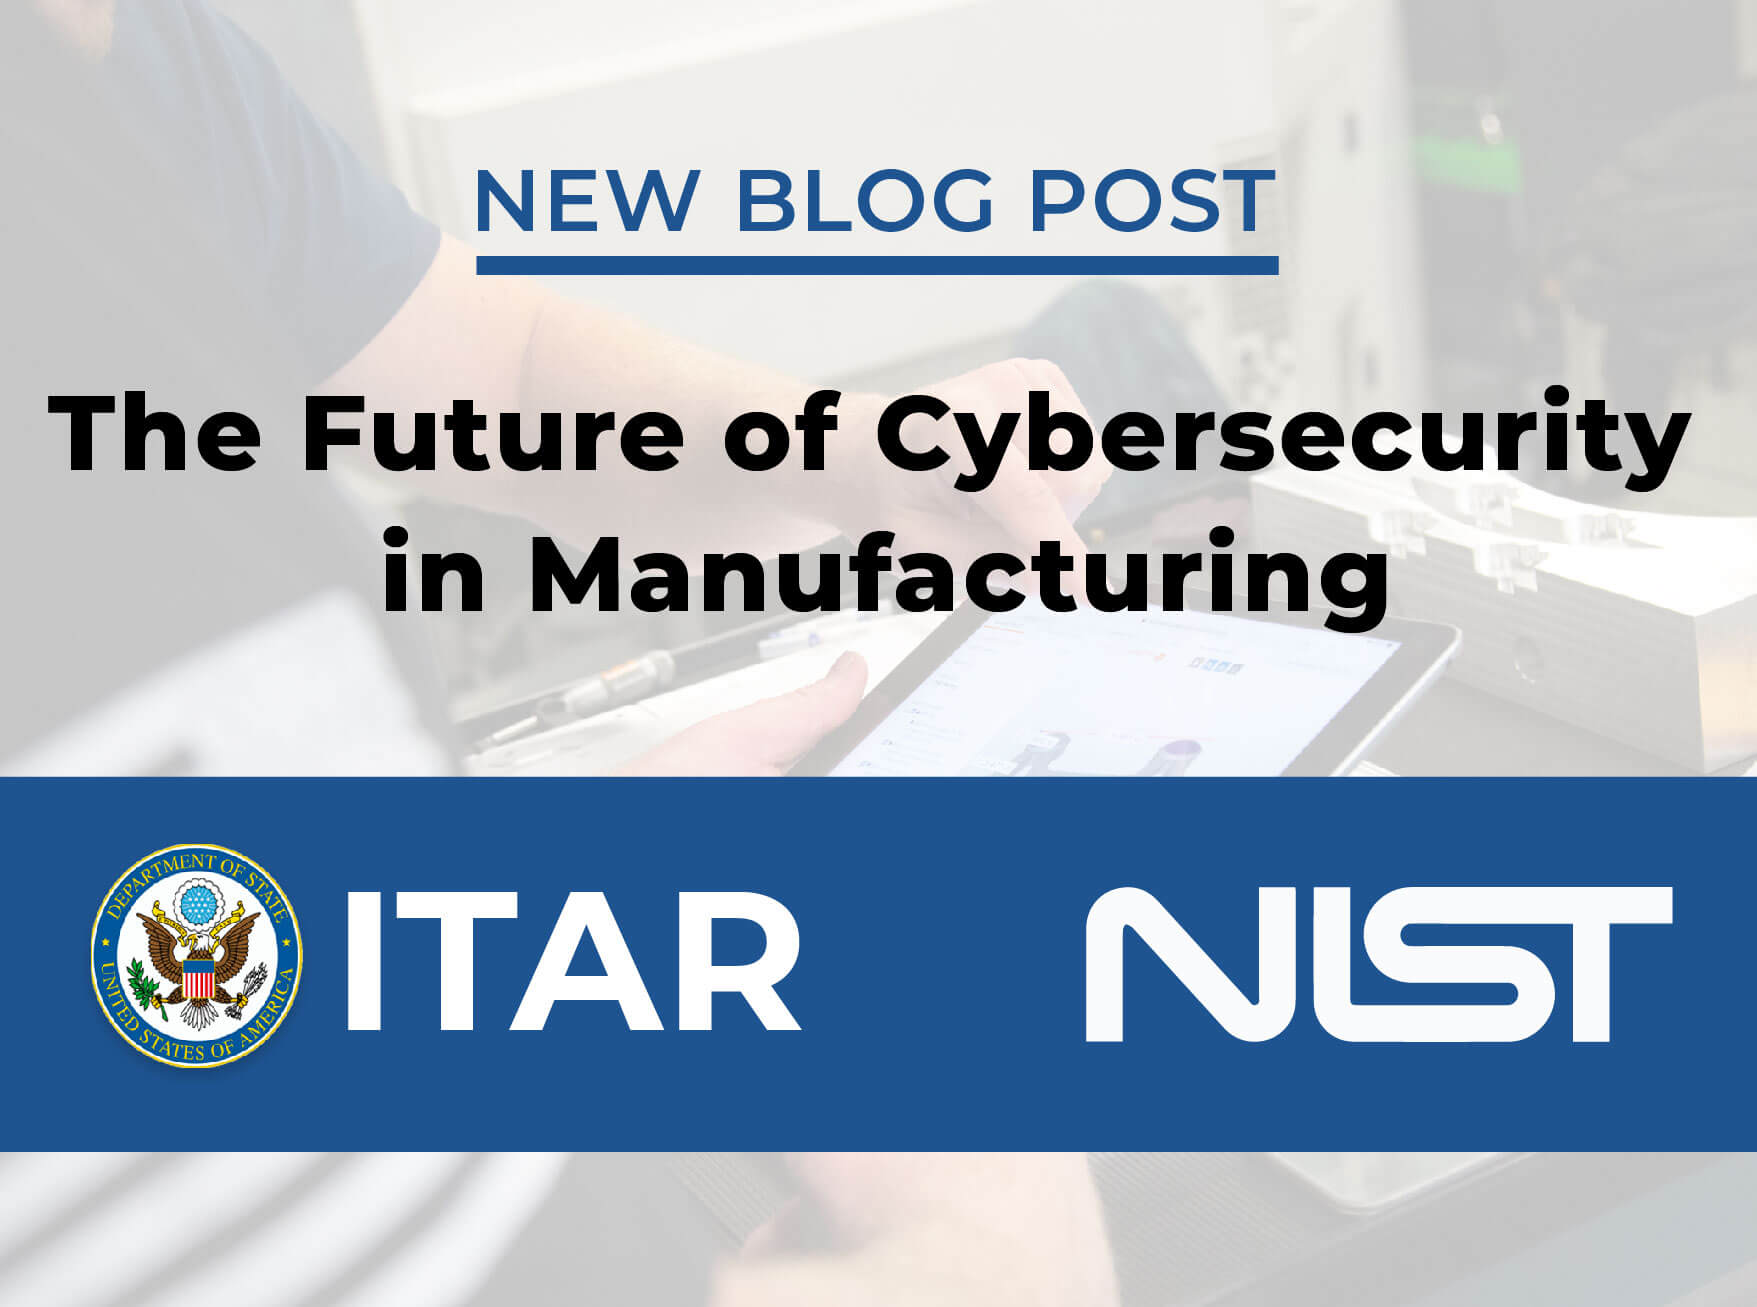 The Future of Cybersecurity in Manufacturing